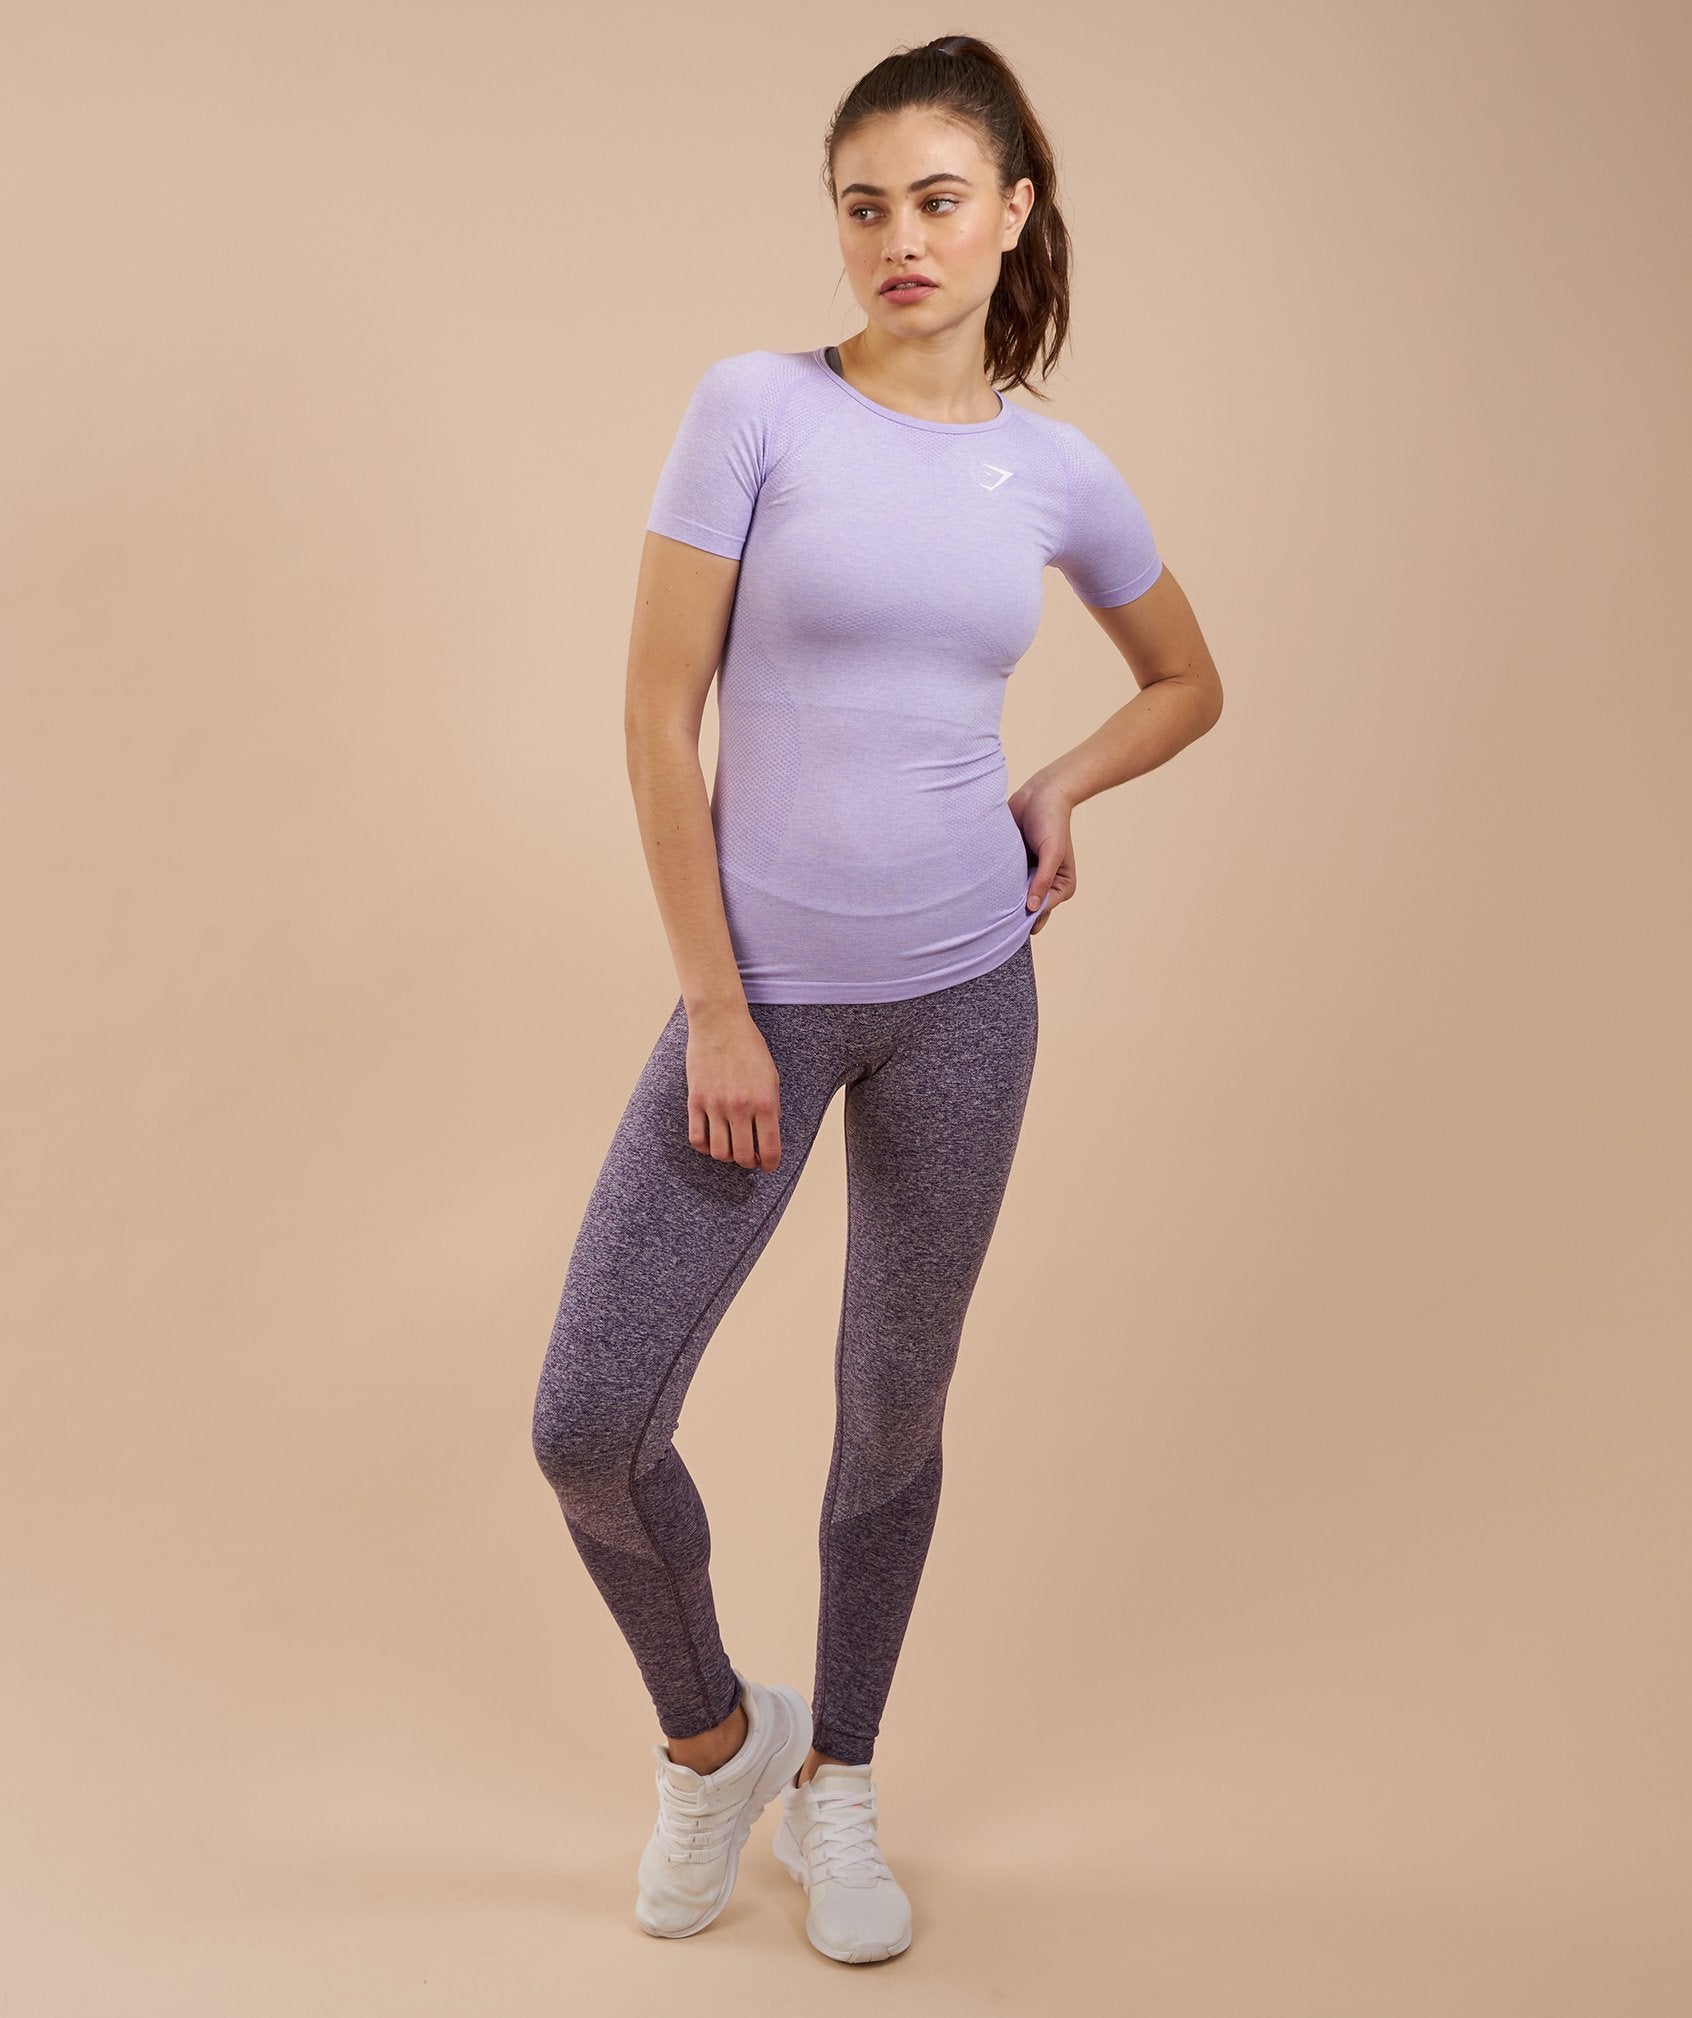 Seamless T-Shirt in Soft Lilac Marl - view 4